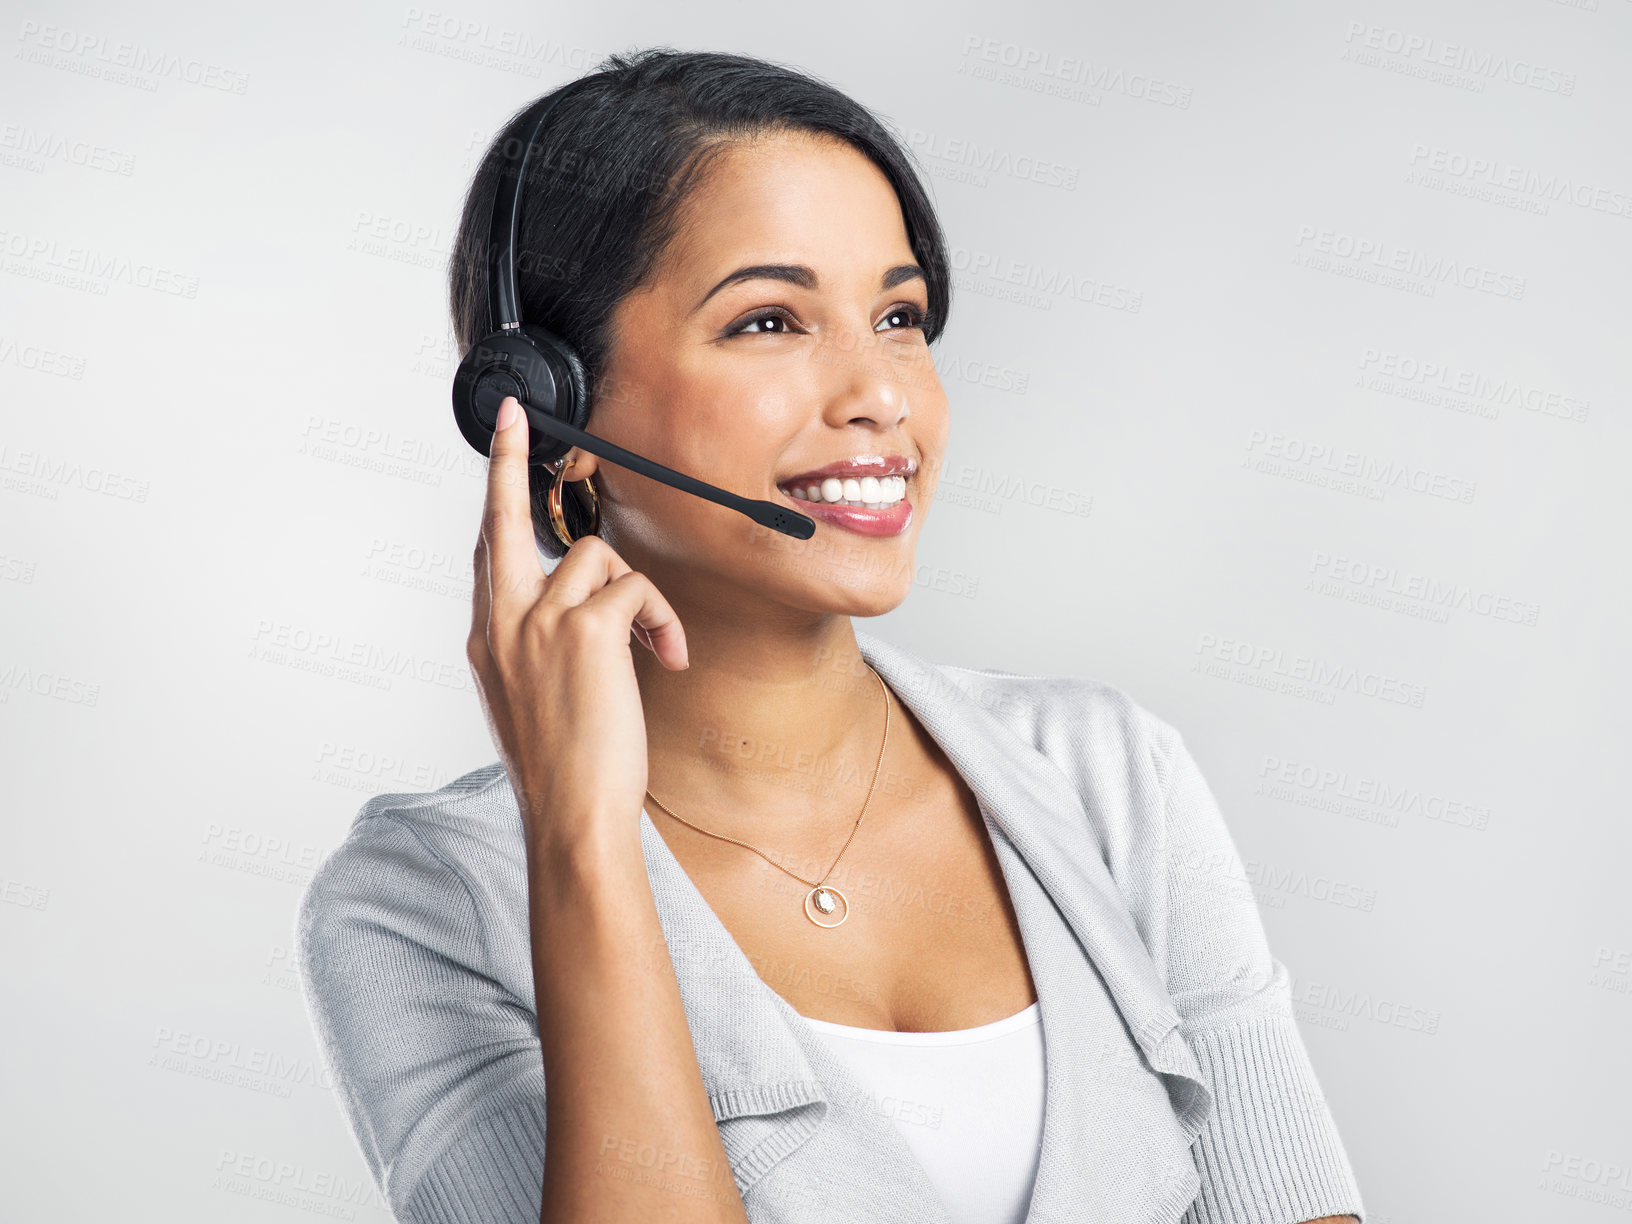 Buy stock photo Studio shot of a confident young businesswoman using a headset against a grey background